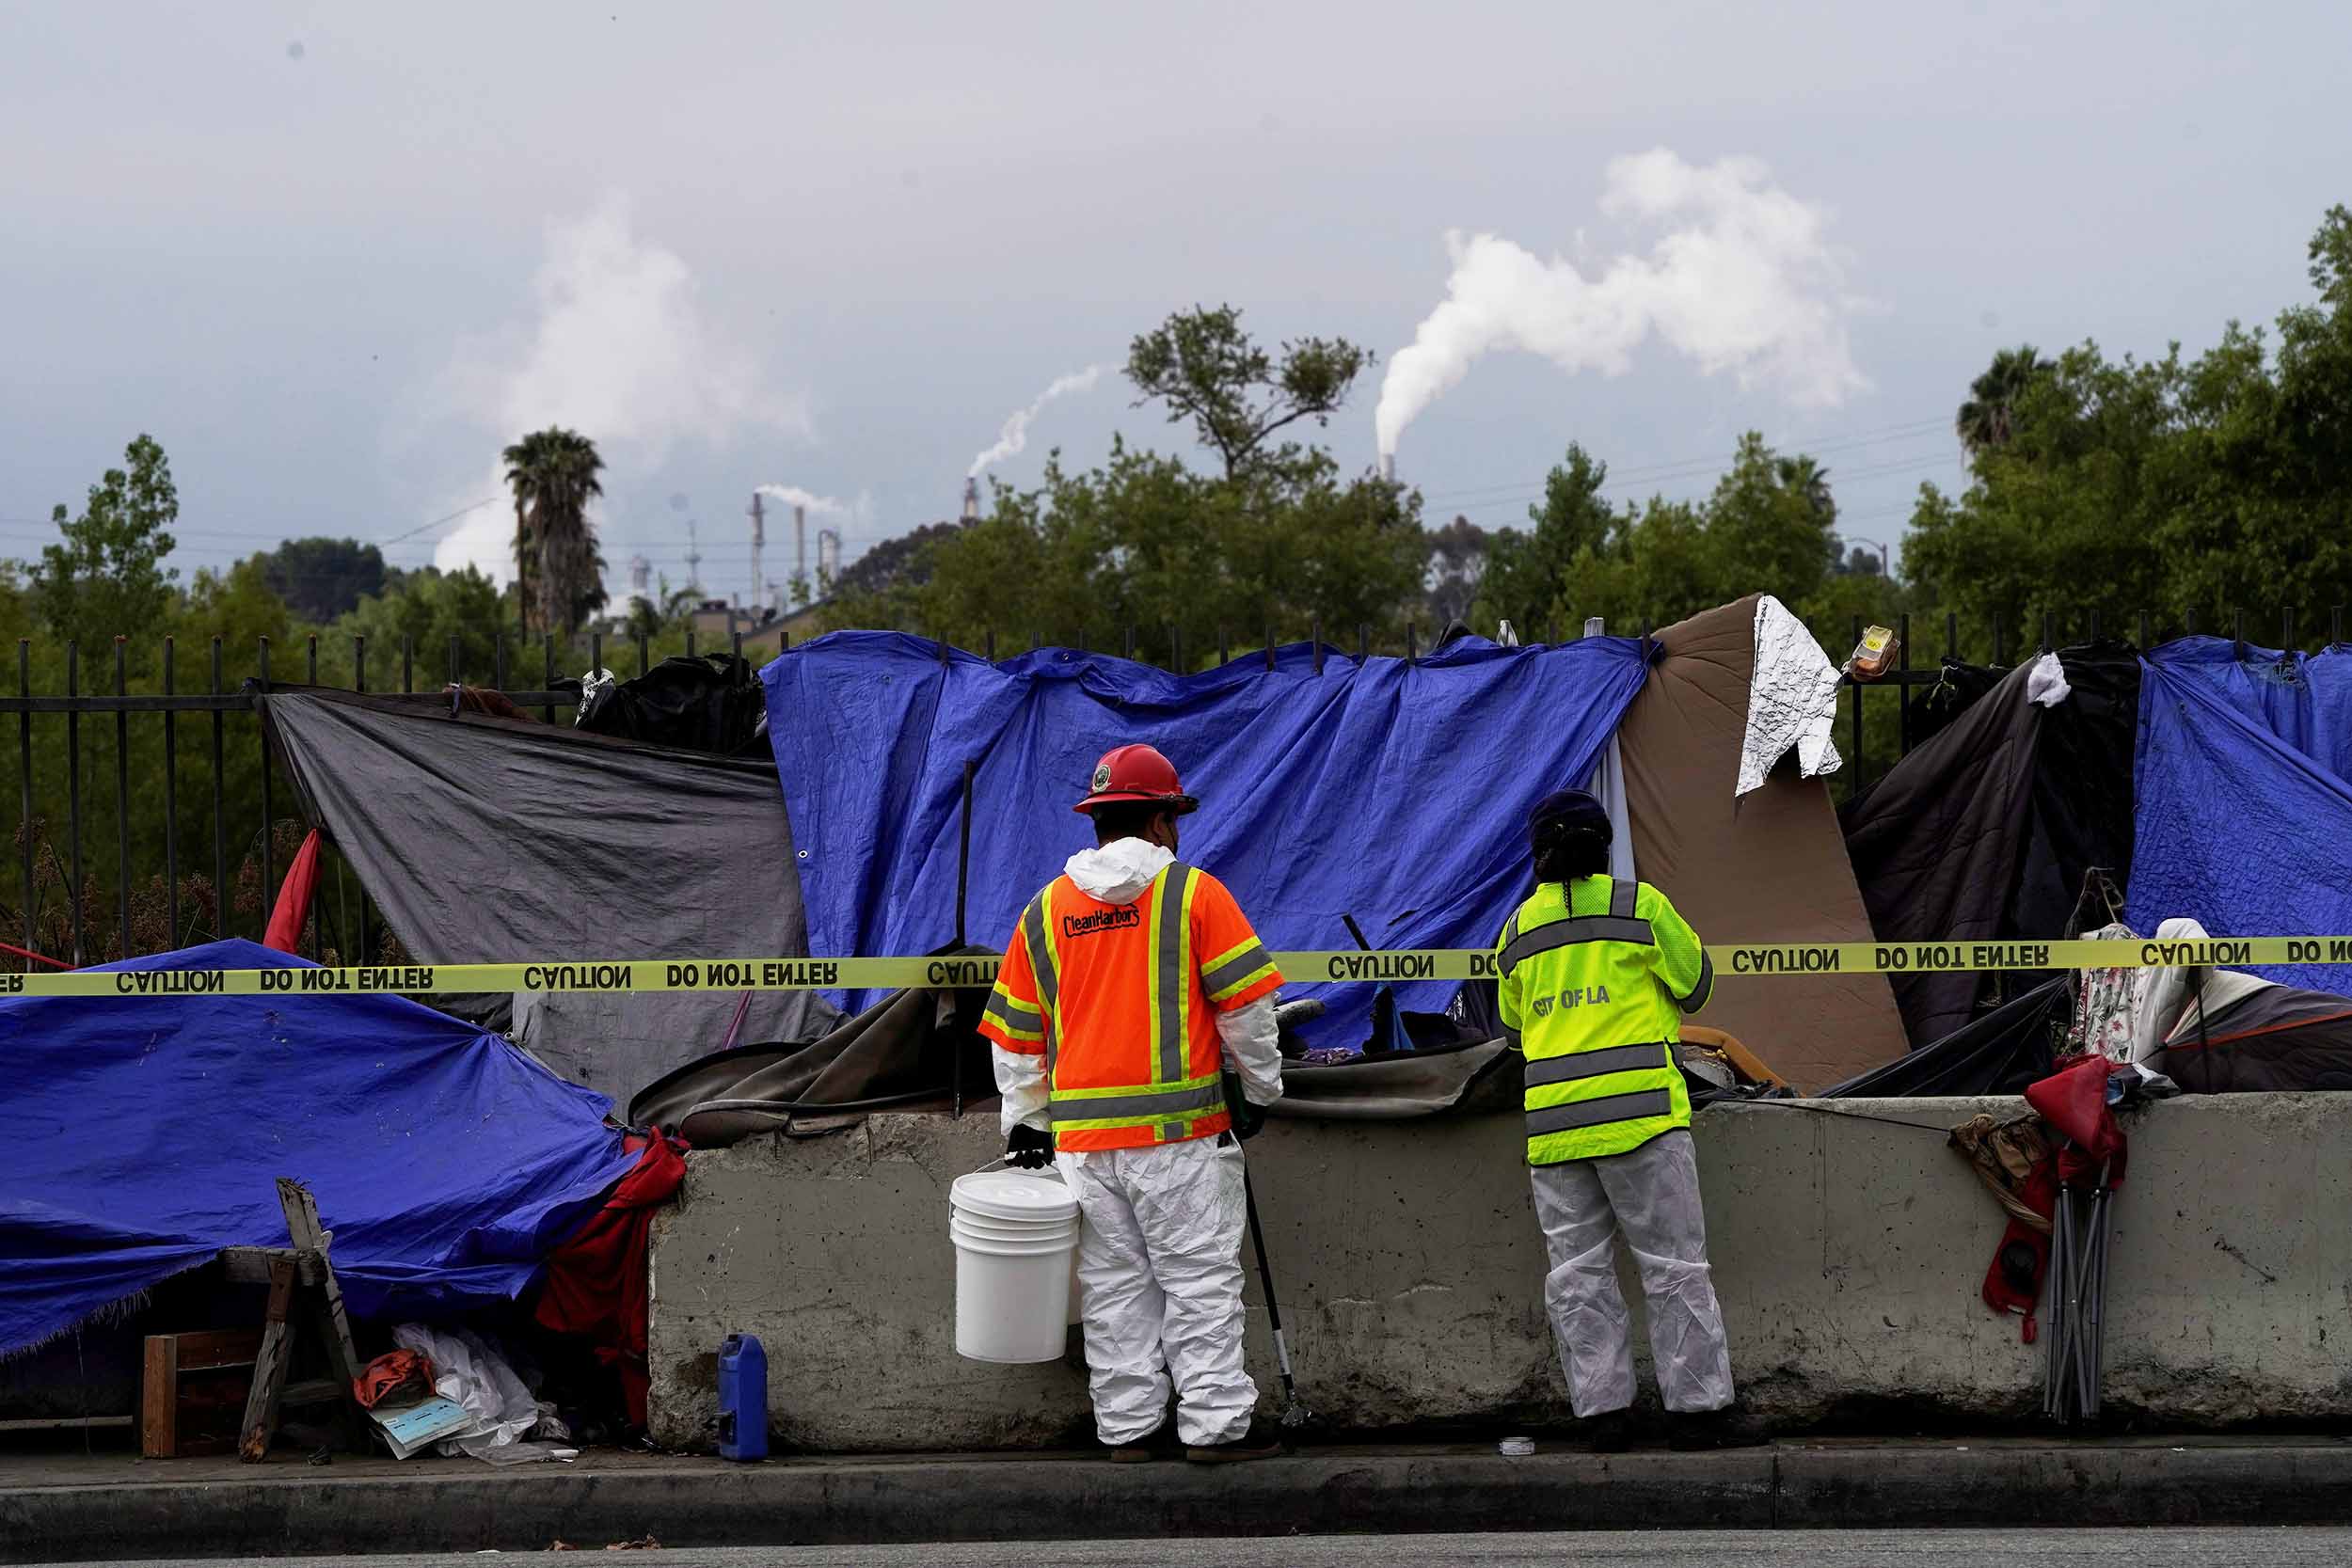 LA Sanitation & Environment (LASAN) workers observe a sidewalk dwelling as police and sanitation workers clear a homeless encampment in Harbor City, Los Angeles, California, U.S., July 1, 2021.